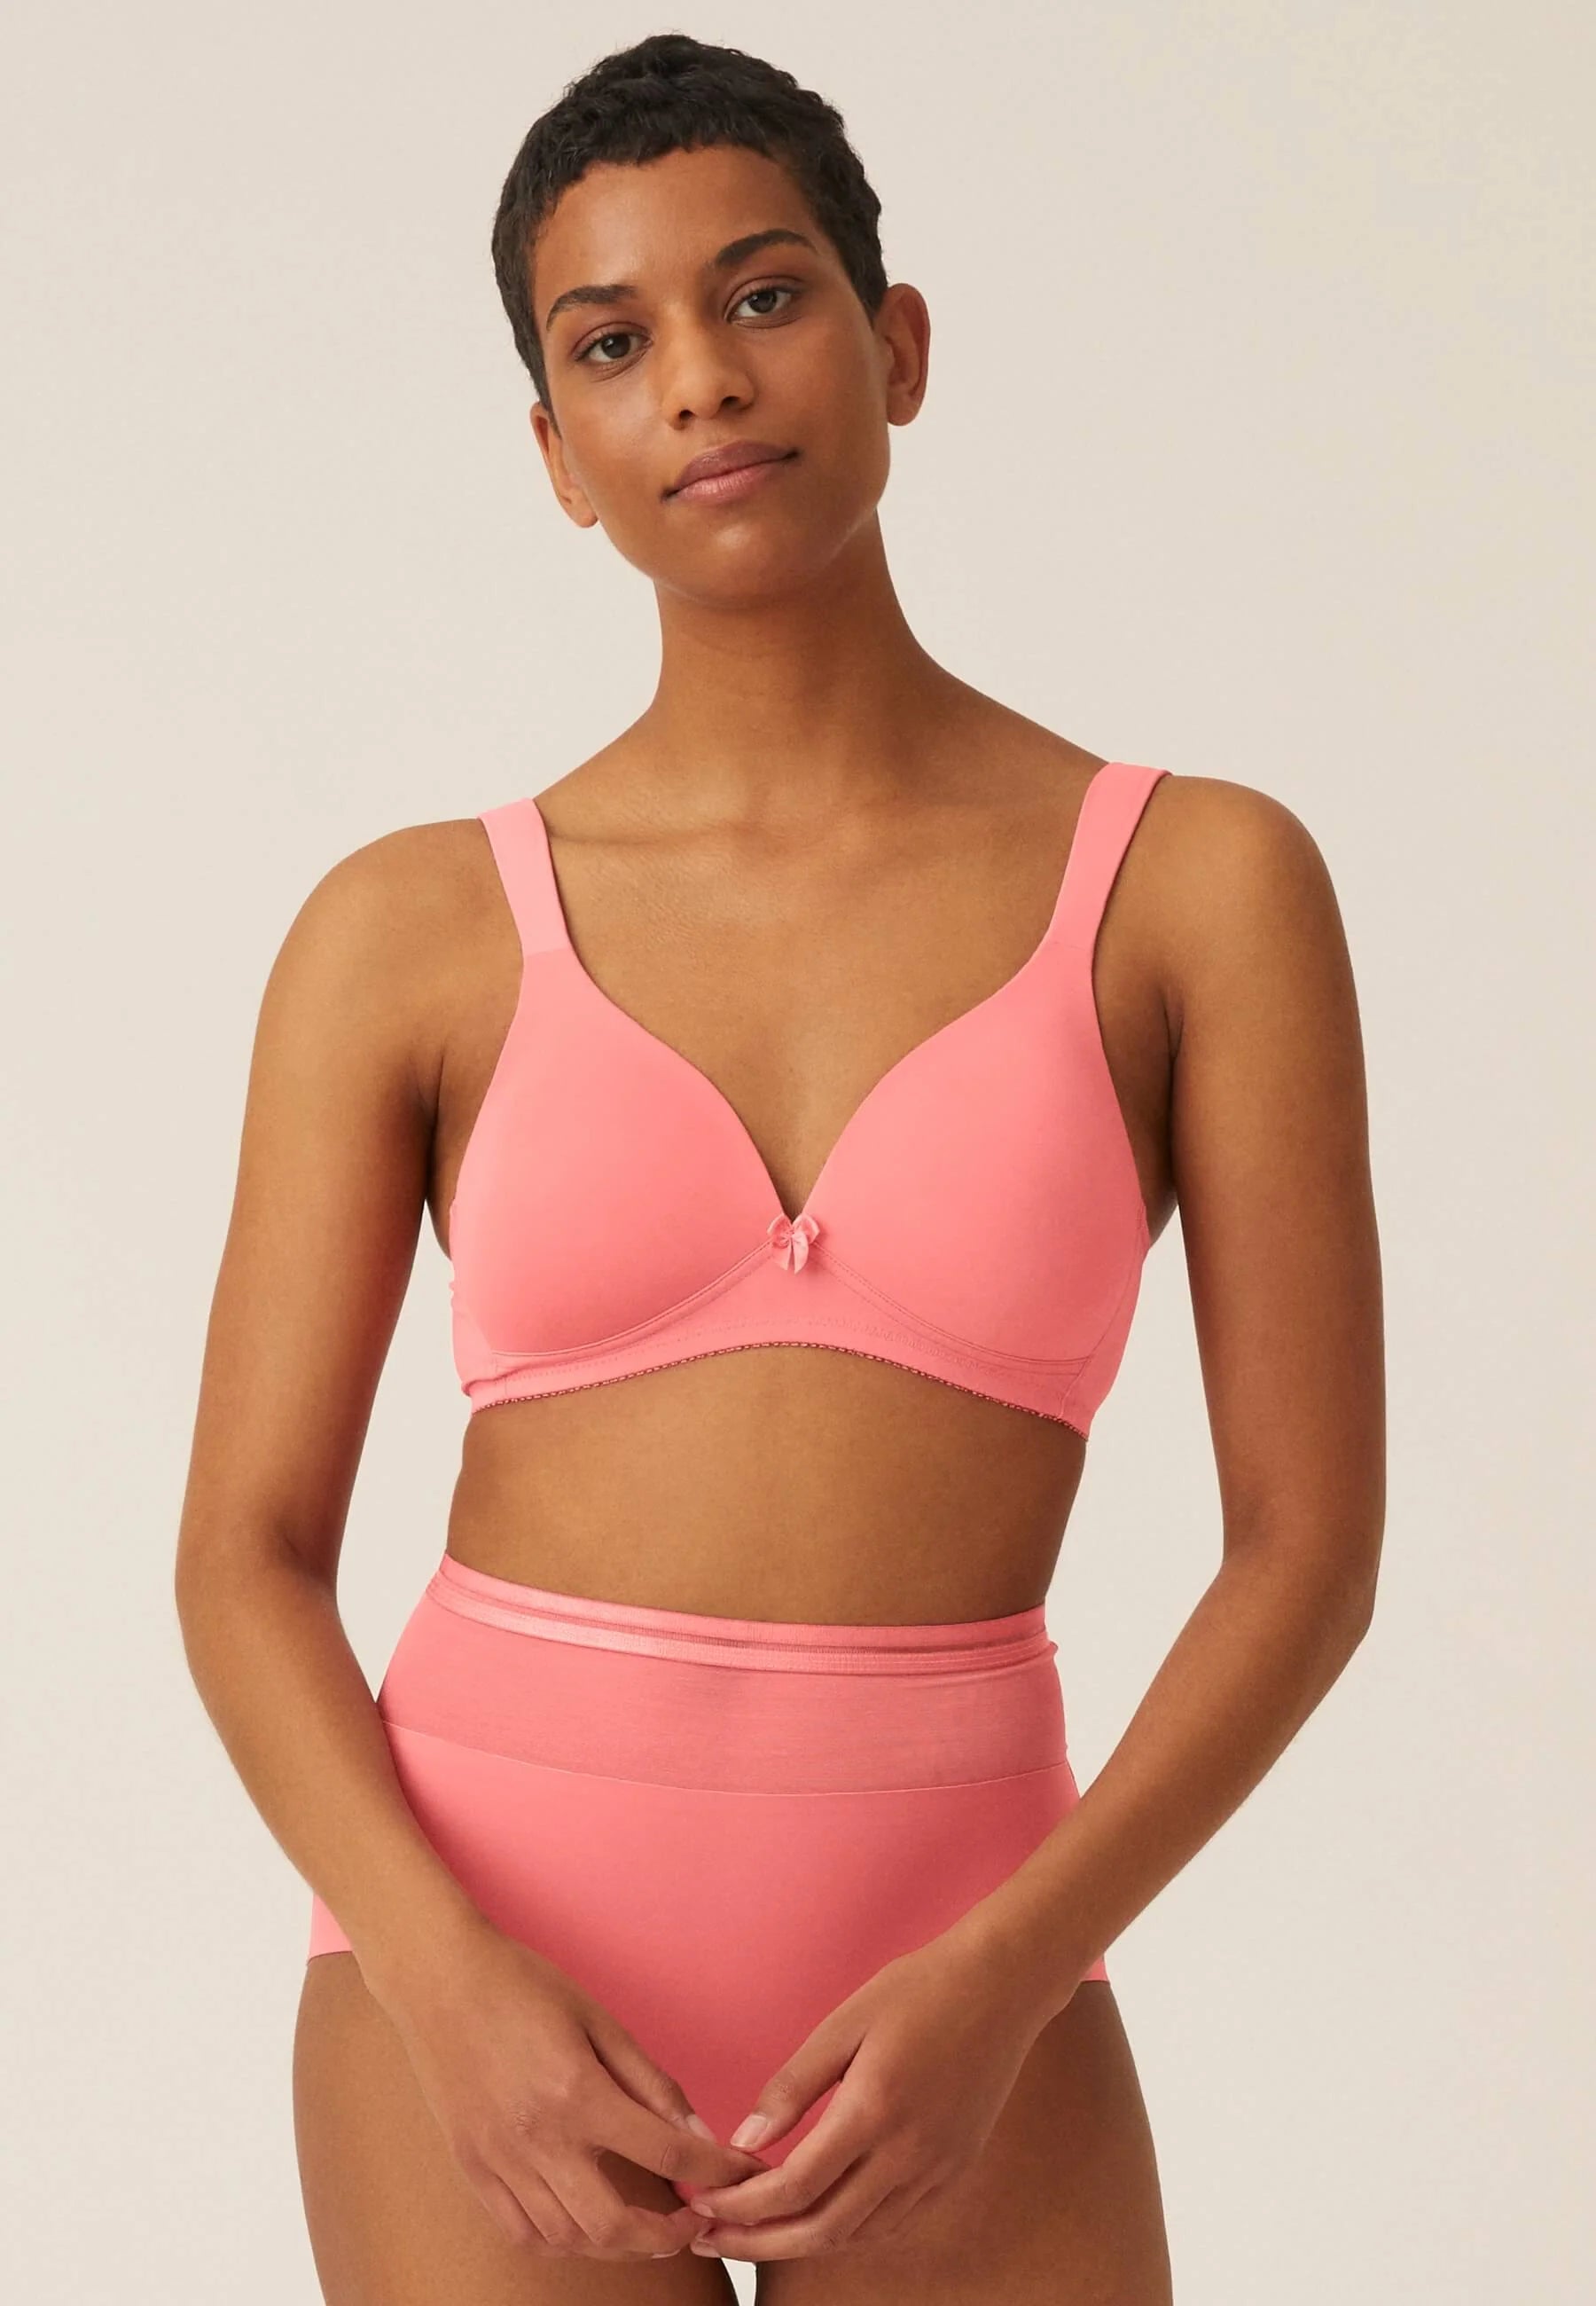 Padded Wirefree T-Shirt Bra with Wide Straps